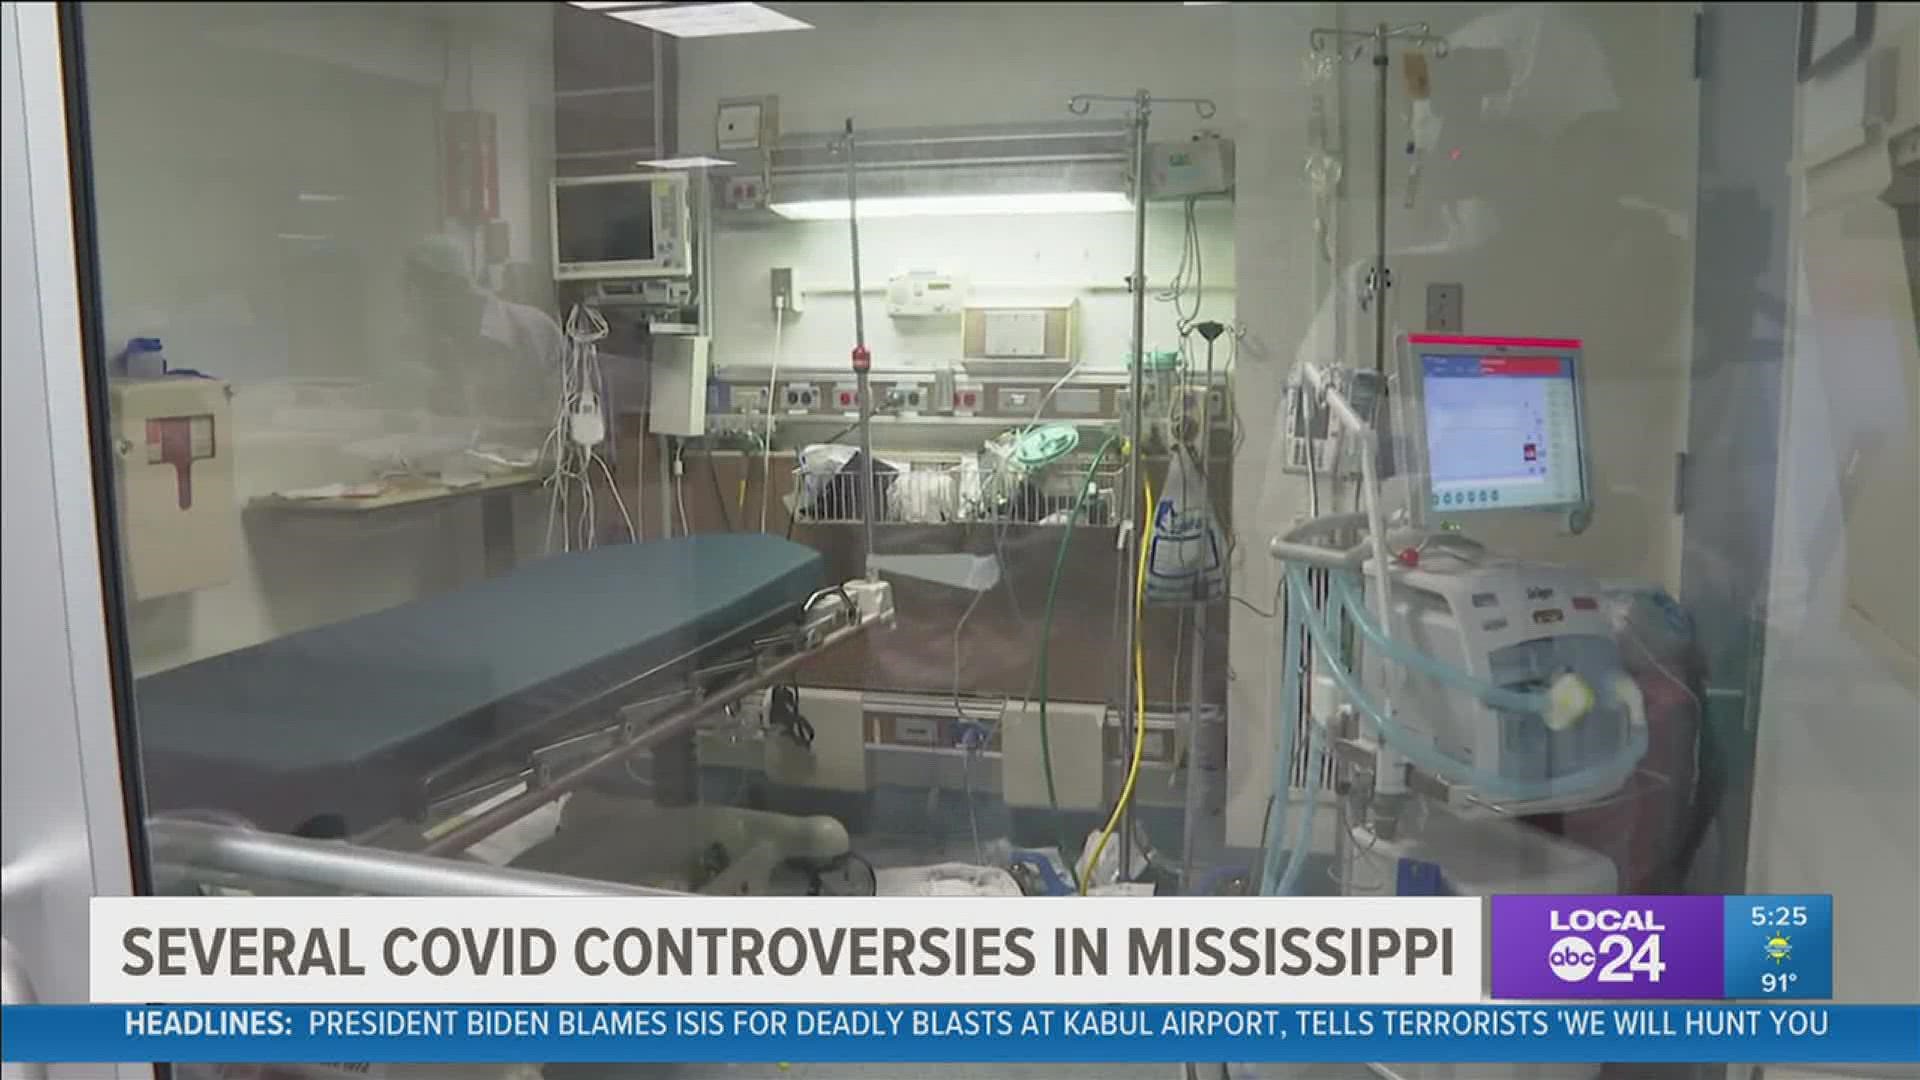 Political analyst and commentator Otis Sanford shared his point of view on the battle against COVID-19 in Mississippi.